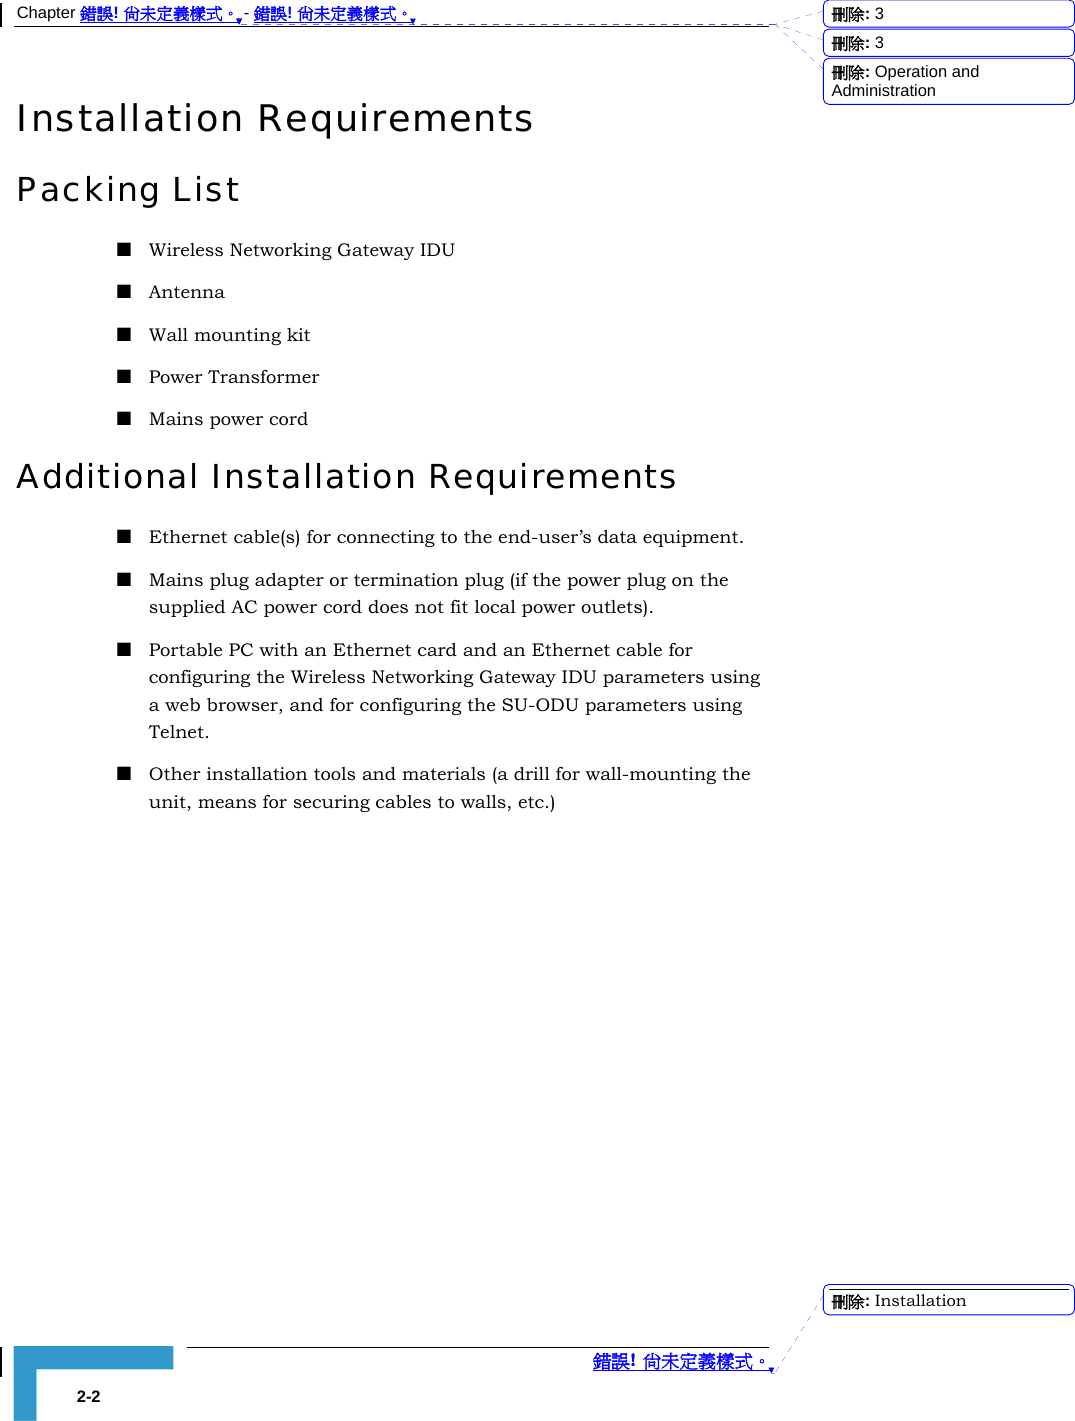 Chapter 錯誤! 尚未定義樣式。 - 錯誤! 尚未定義樣式。  錯誤! 尚未定義樣式。 2-2 Installation Requirements Packing List  Wireless Networking Gateway IDU   Antenna  Wall mounting kit  Power Transformer  Mains power cord Additional Installation Requirements  Ethernet cable(s) for connecting to the end-user’s data equipment.    Mains plug adapter or termination plug (if the power plug on the supplied AC power cord does not fit local power outlets).  Portable PC with an Ethernet card and an Ethernet cable for configuring the Wireless Networking Gateway IDU parameters using a web browser, and for configuring the SU-ODU parameters using Telnet.  Other installation tools and materials (a drill for wall-mounting the unit, means for securing cables to walls, etc.) 刪除:  3刪除:  3刪除: Operation and Administration刪除: Installation